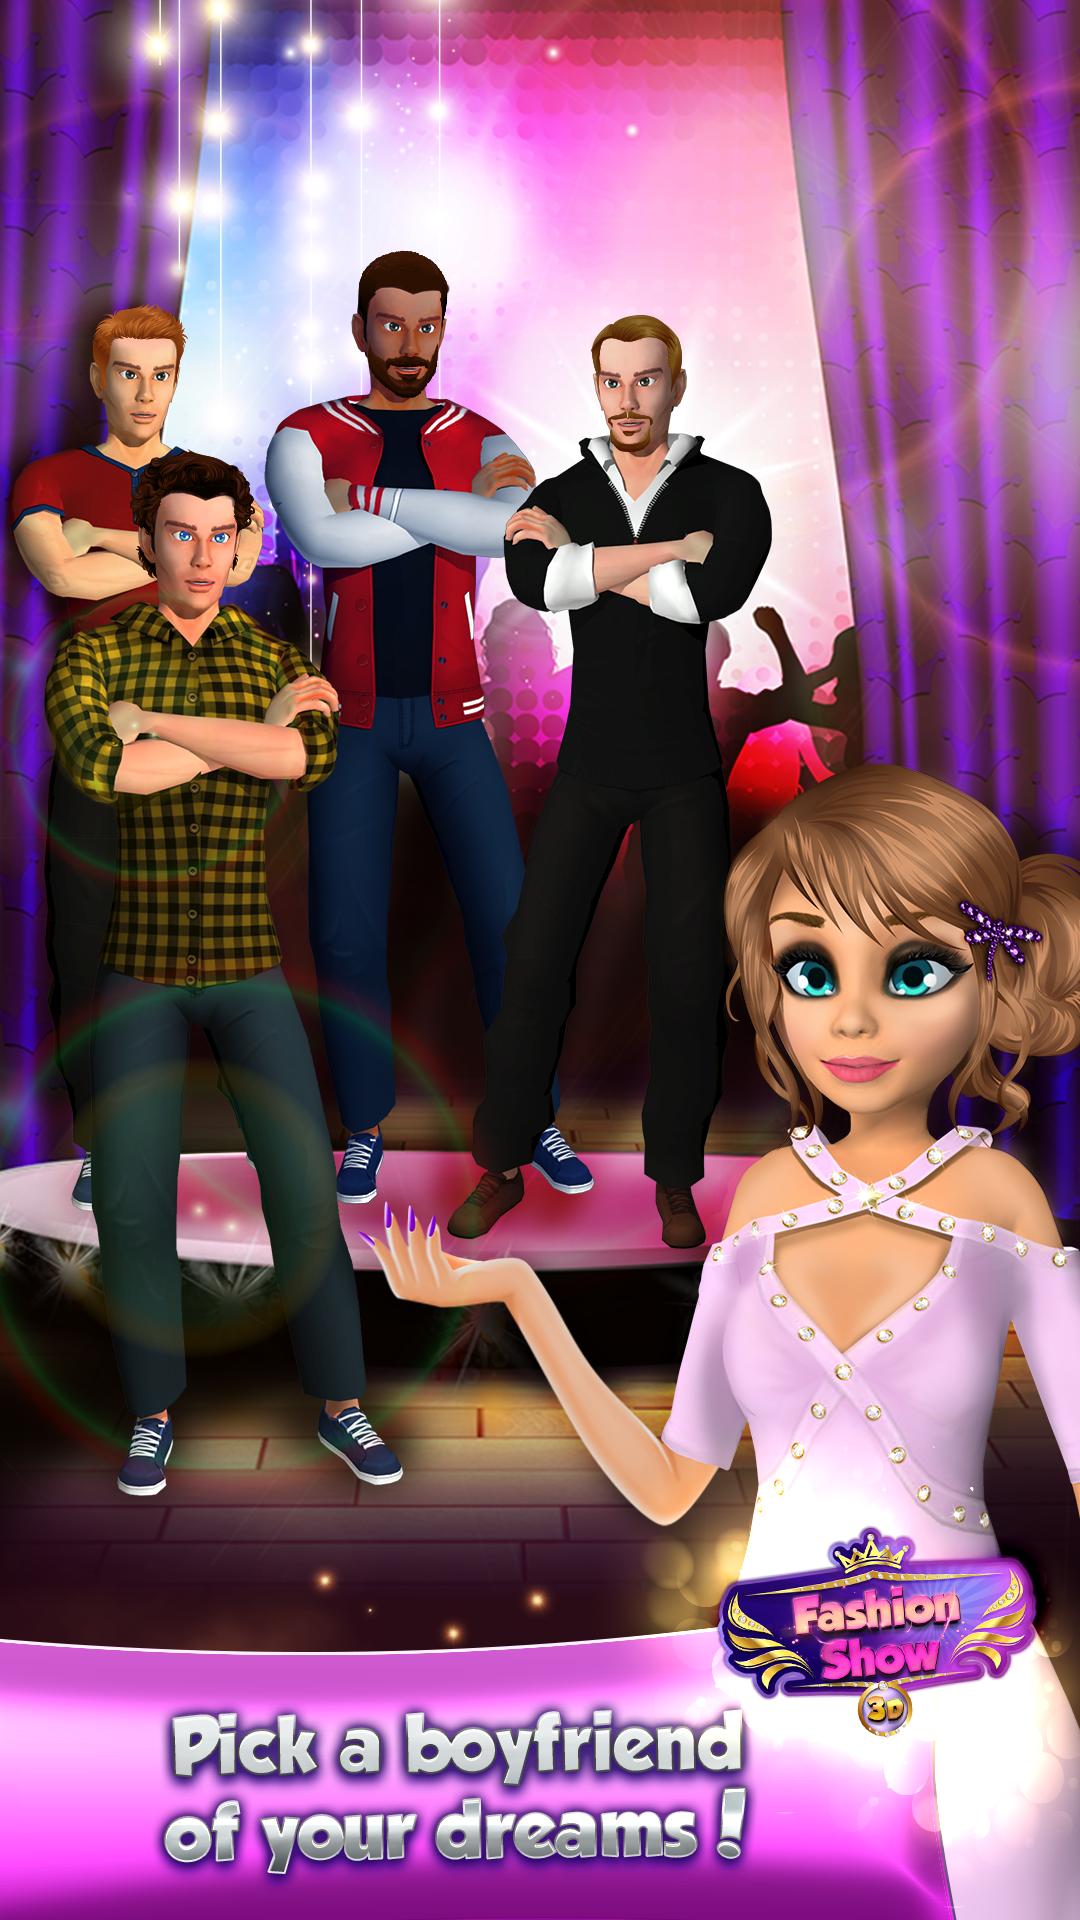 Model Dress up 3D Fashion Show Game for Android APK